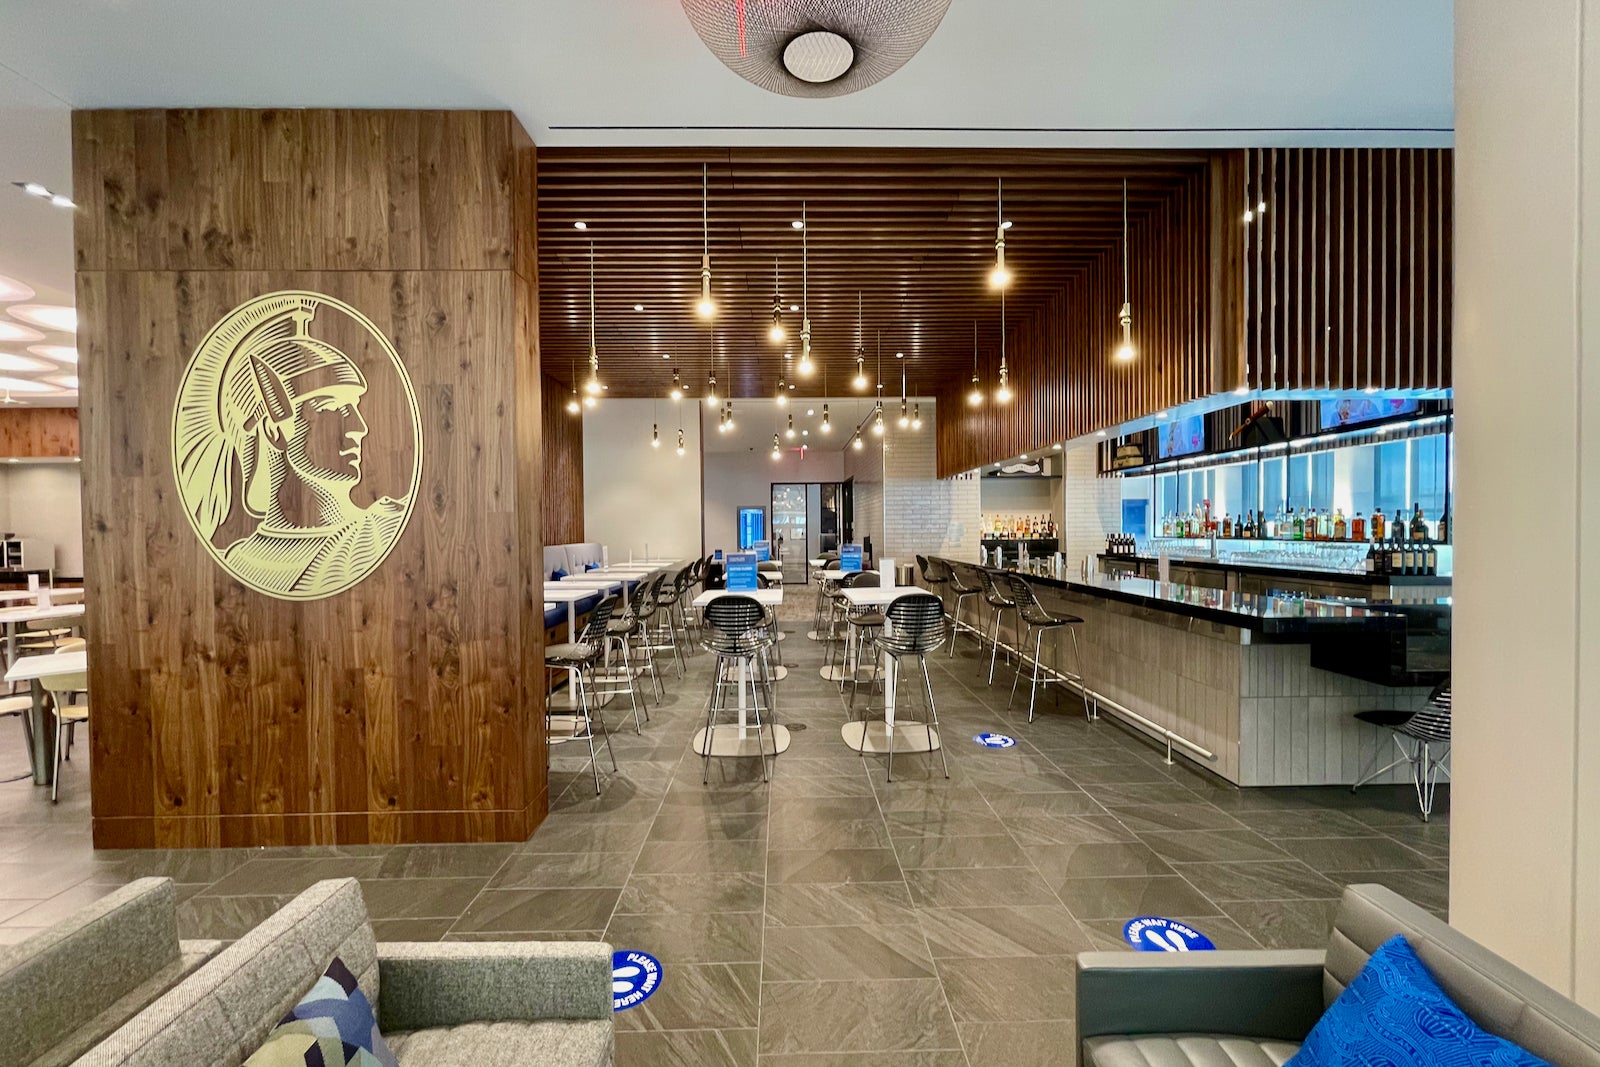 New details Amex will open a Centurion Lounge in Newark Airport The